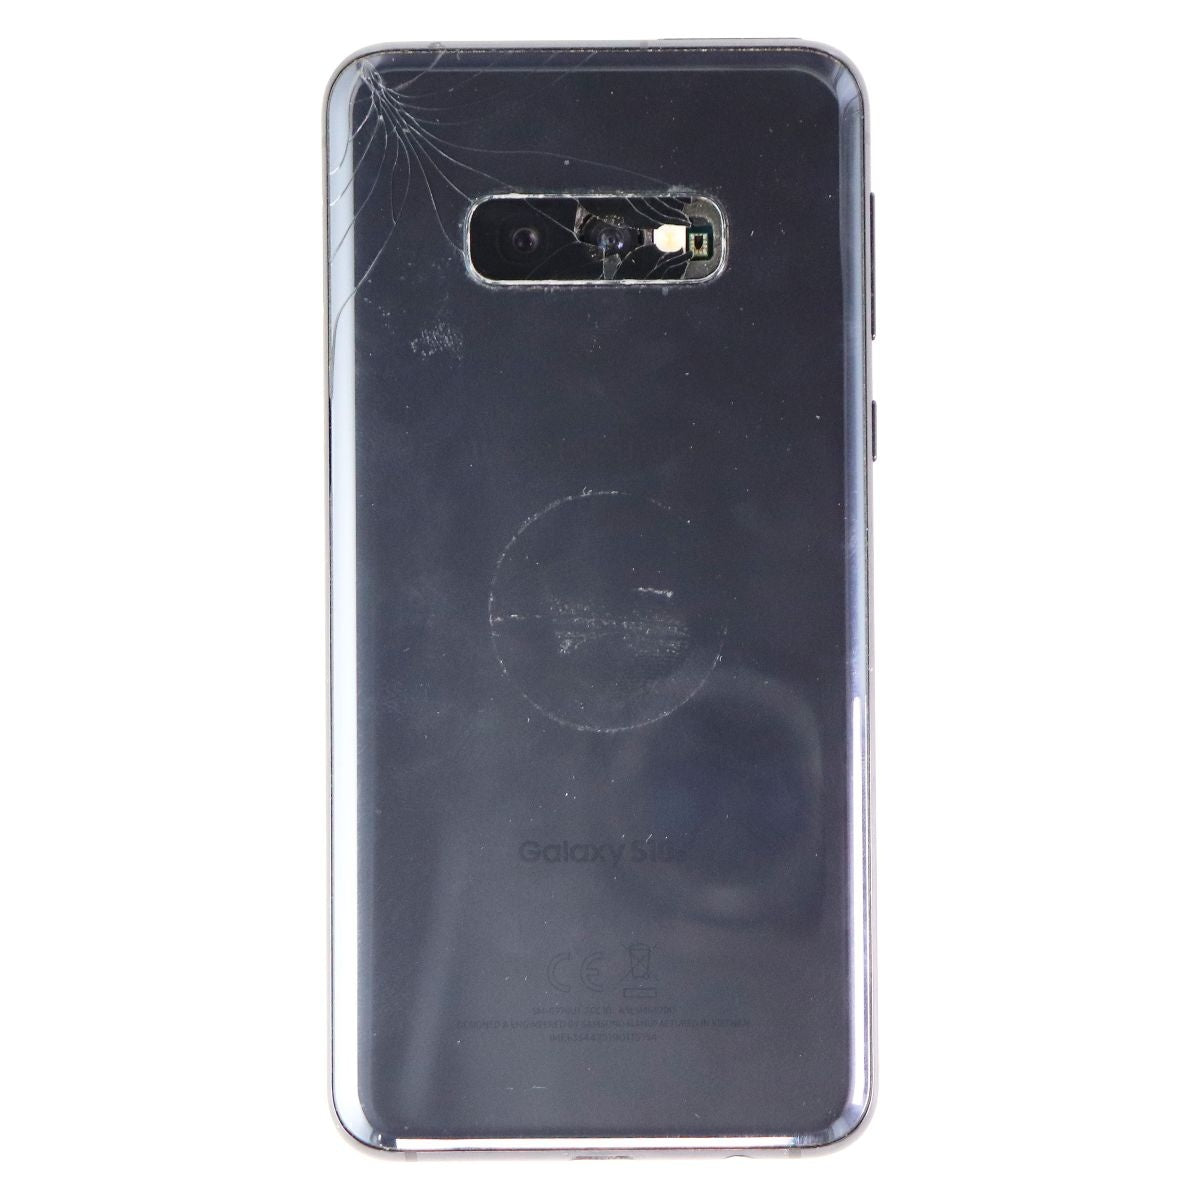 Samsung Galaxy S10e Smartphone (SM-G970U1) Metro PCs Only - 128GB / Prism Blue Cell Phones & Smartphones Samsung    - Simple Cell Bulk Wholesale Pricing - USA Seller